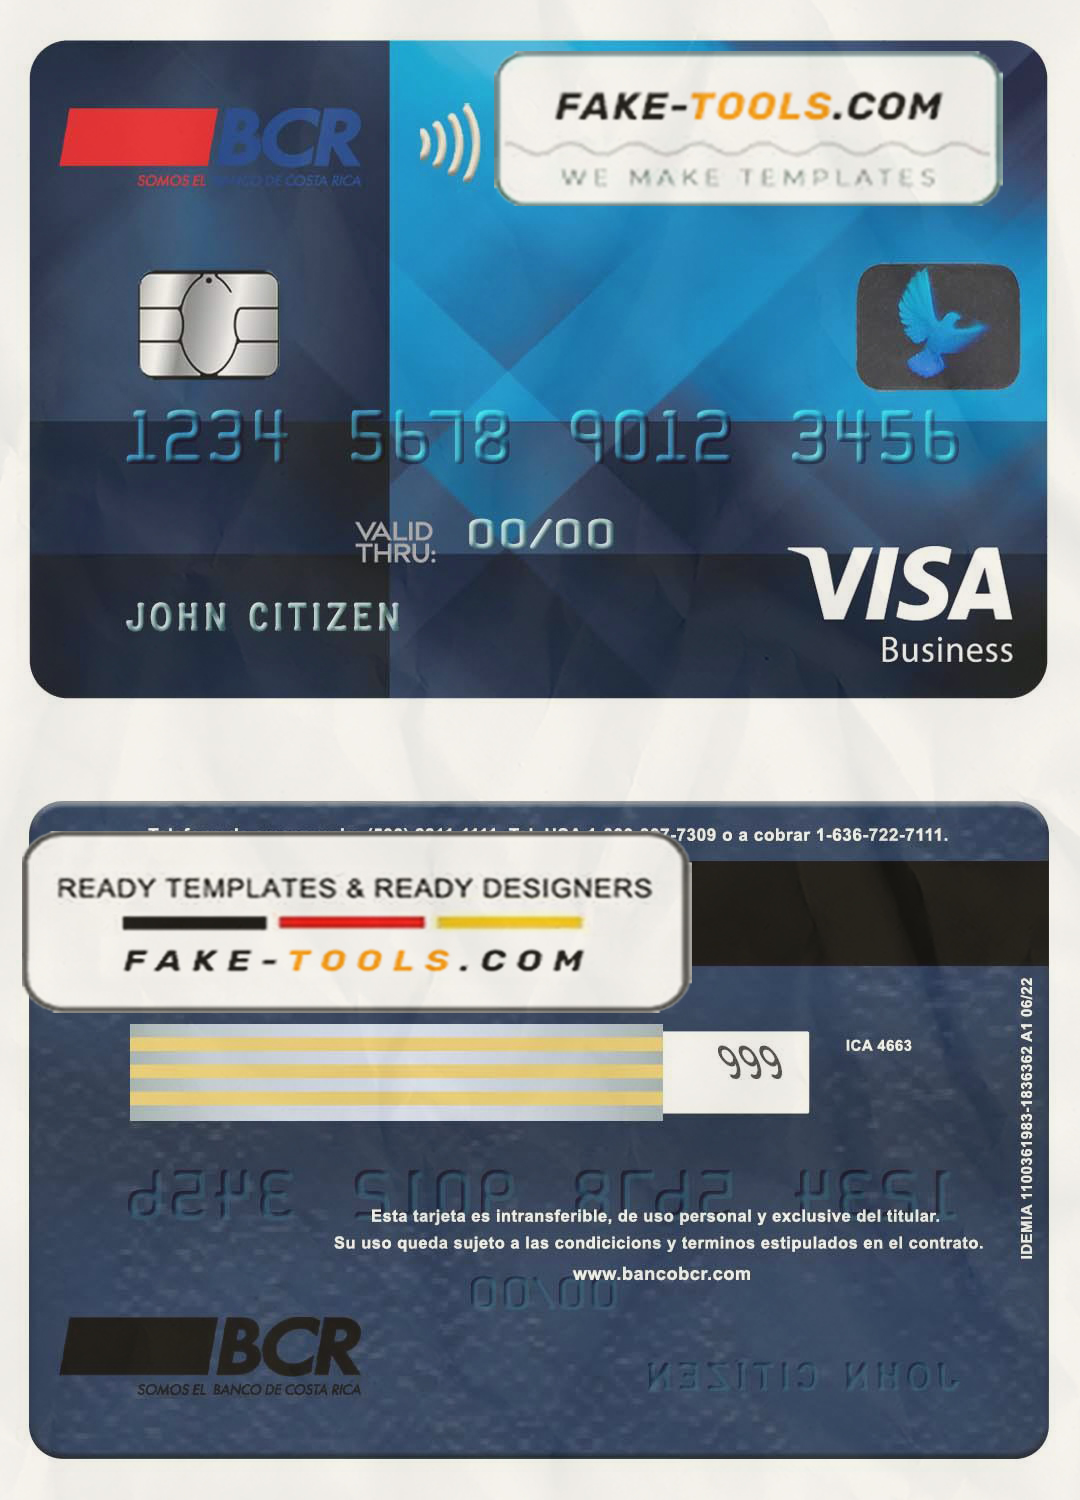 Costa Rica The Bank of Costa Rica bank visa business credit card template in PSD format Scan effect